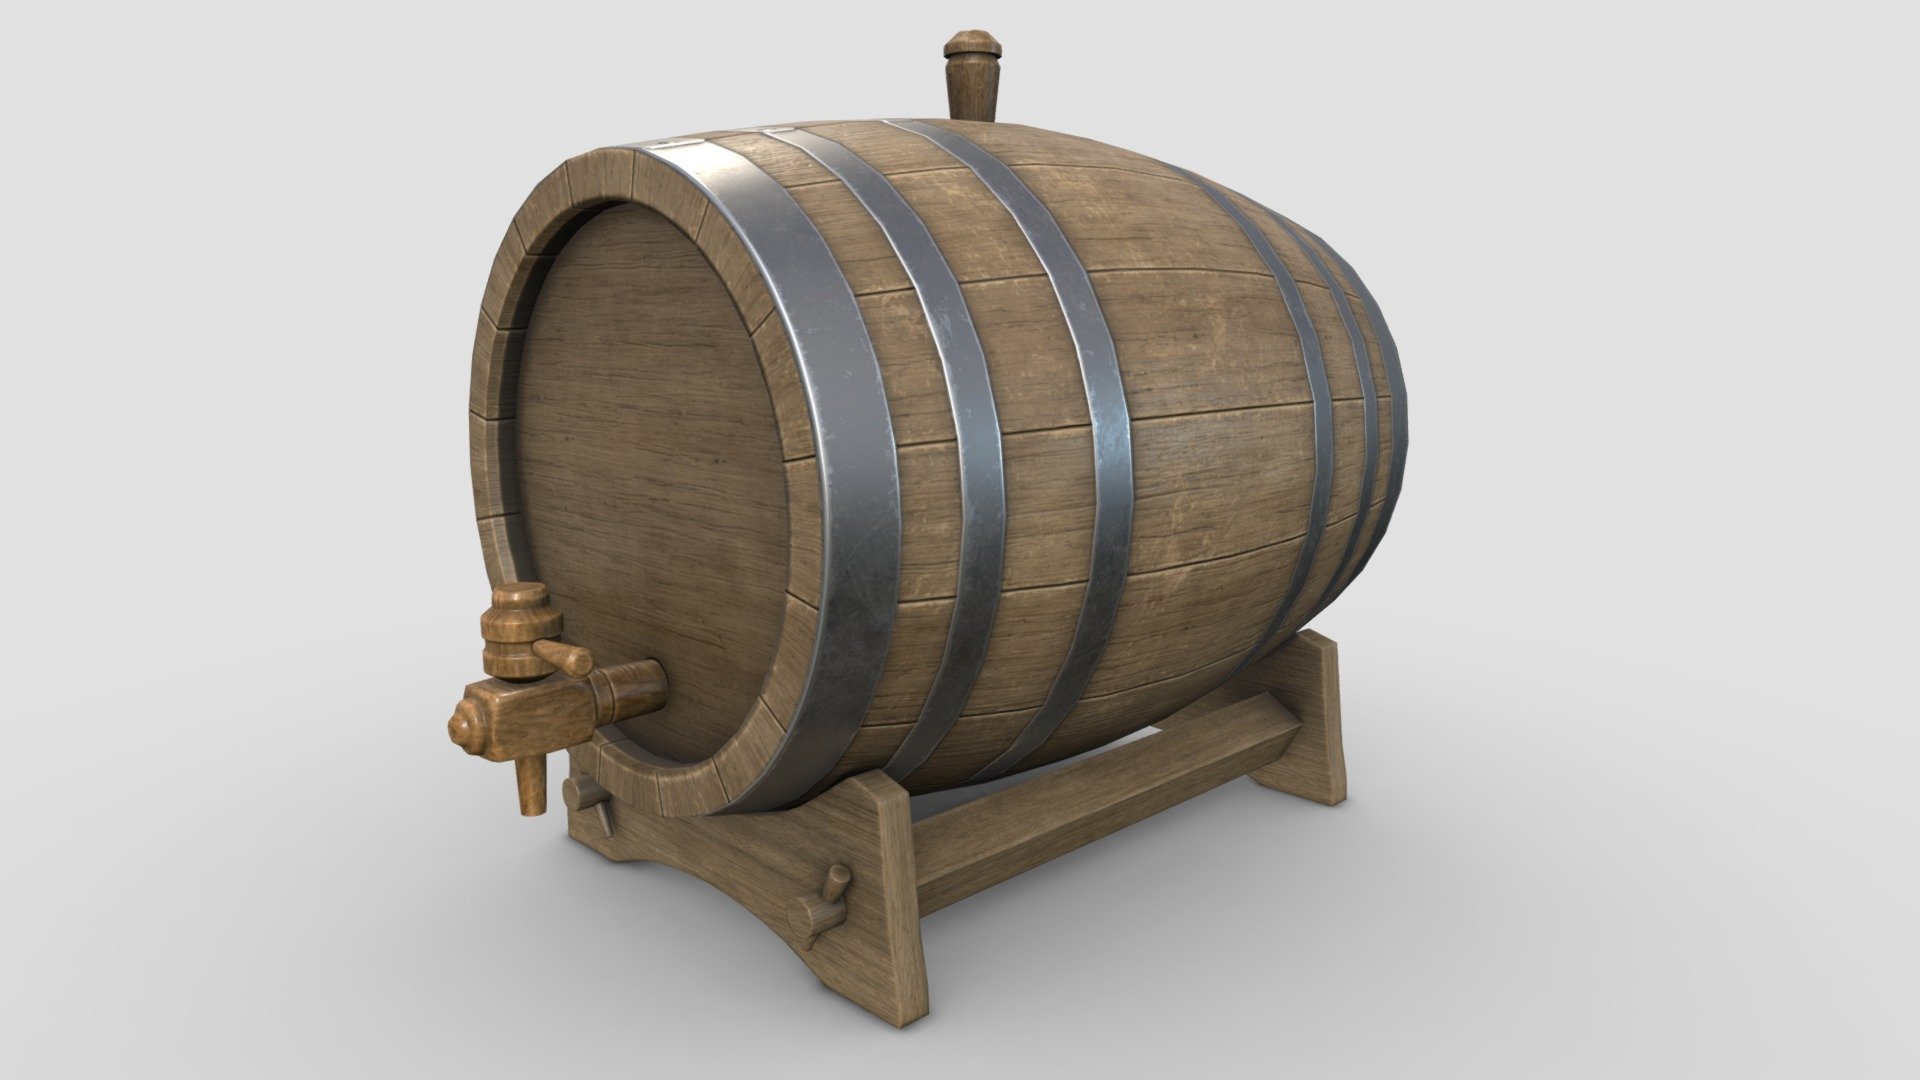 low poly game ready to use.

the file include:

Unreal textures.

unity textures.

all 2048 x 2048

pivot model is (0,0,0), in real world scale.

more images visit :

https://www.artstation.com/artwork/WRQQJ - Oak Barrel - Buy Royalty Free 3D model by KloWorks 3d model